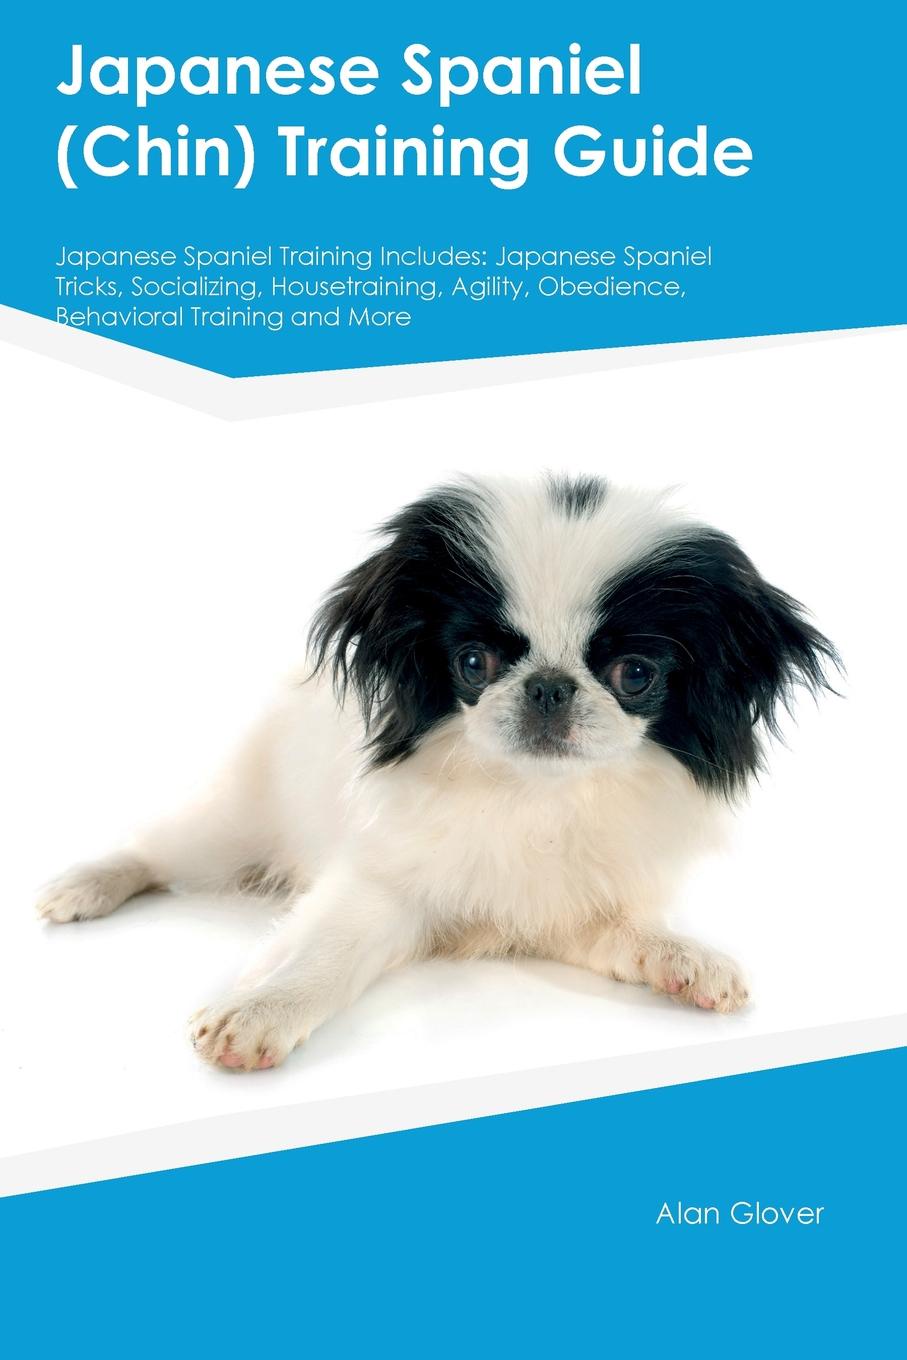 Japanese Spaniel (Chin) Training Guide Japanese Spaniel Training Includes. Japanese Spaniel Tricks, Socializing, Housetraining, Agility, Obedience, Behavioral Training and More